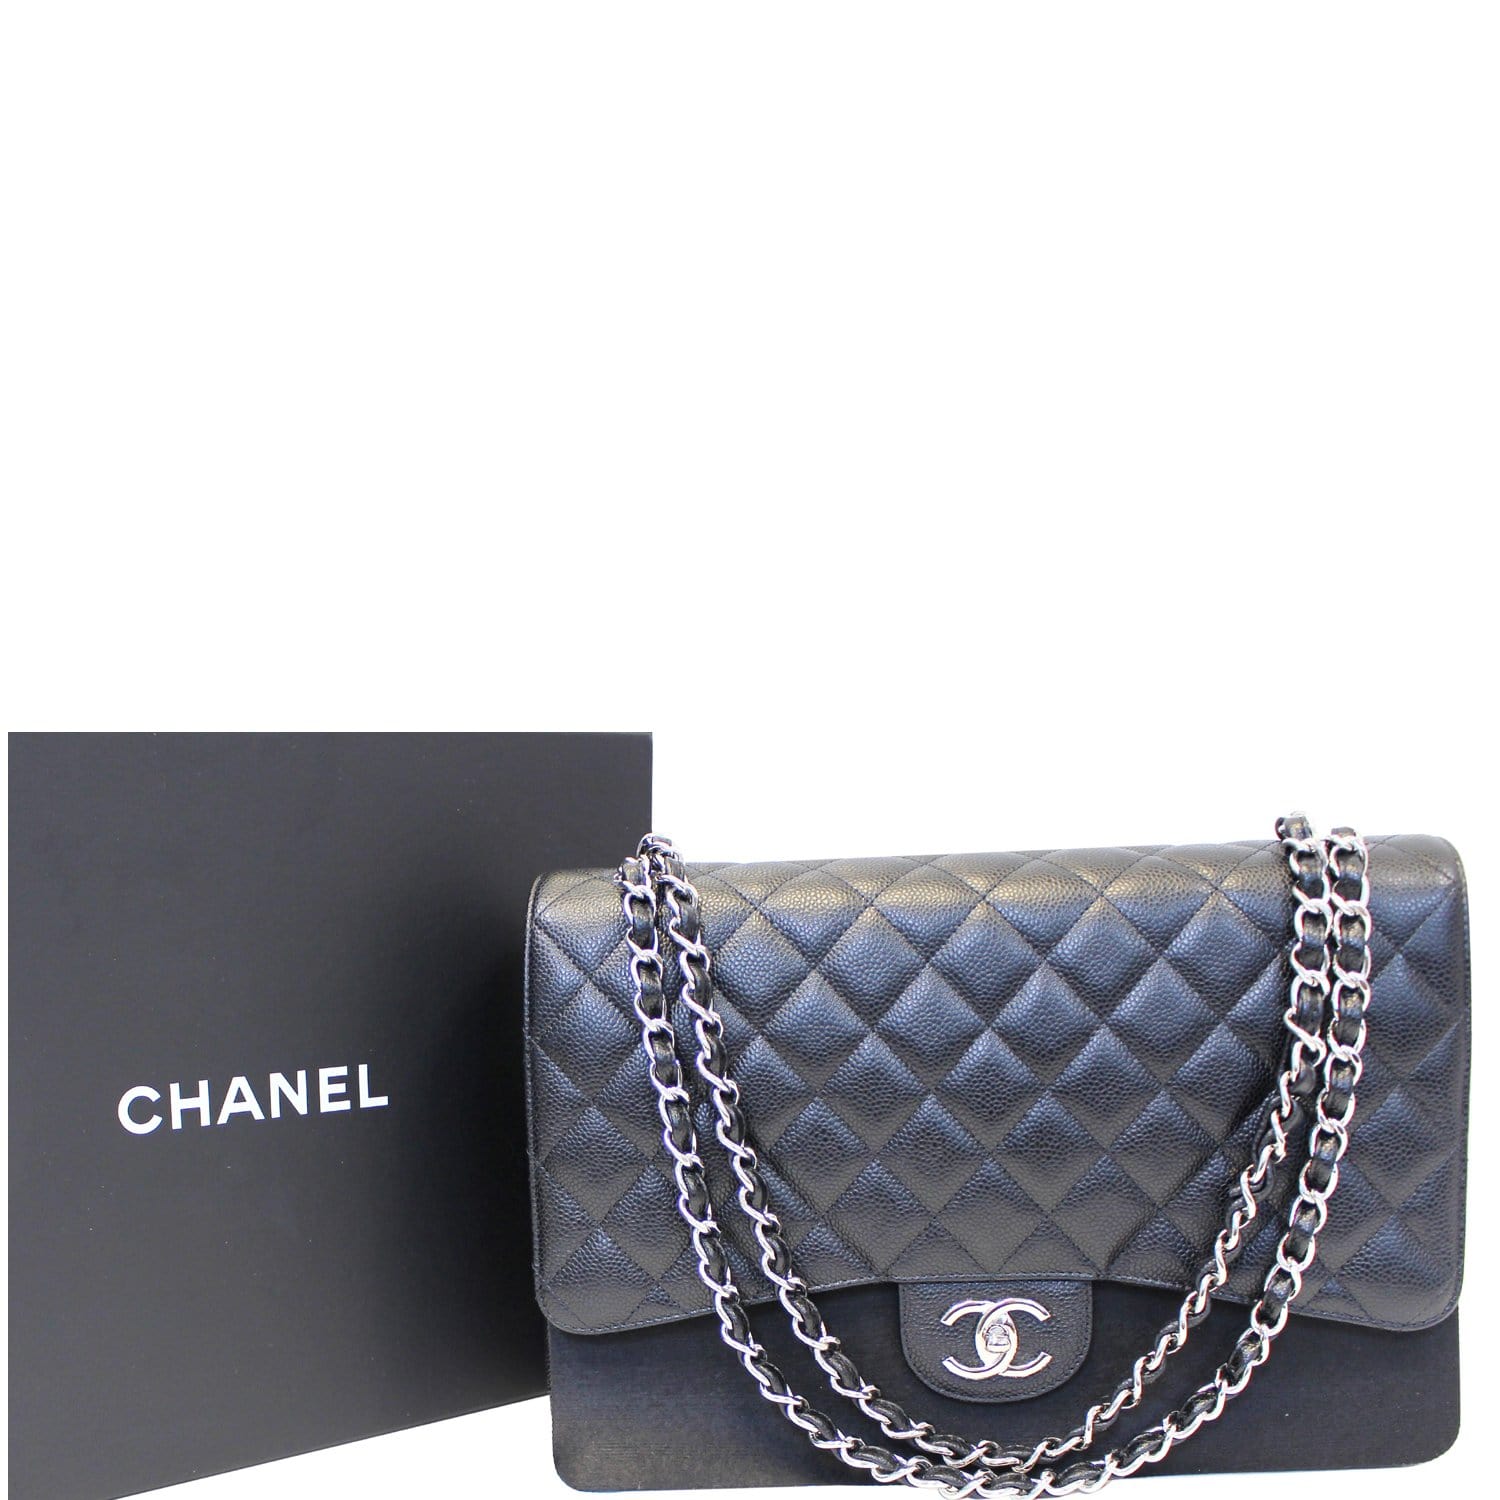 Chanel Quilted Caviar Leather Classic Maxi Double Flap Silver Hardware 2.55  Black Cross Body Bag 25% off retail